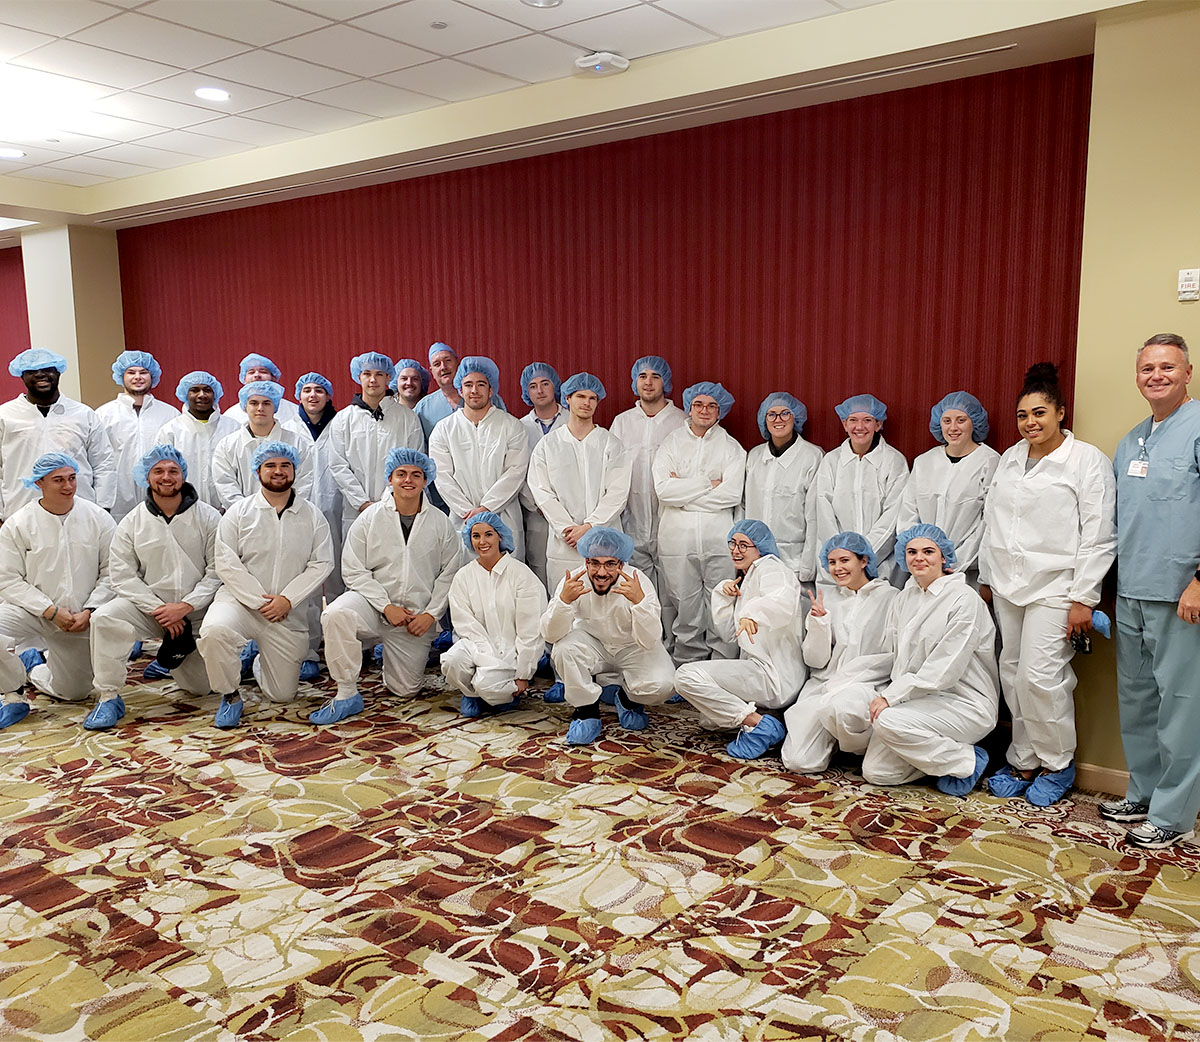 SU Business Students in Scrubs Touring PRMC